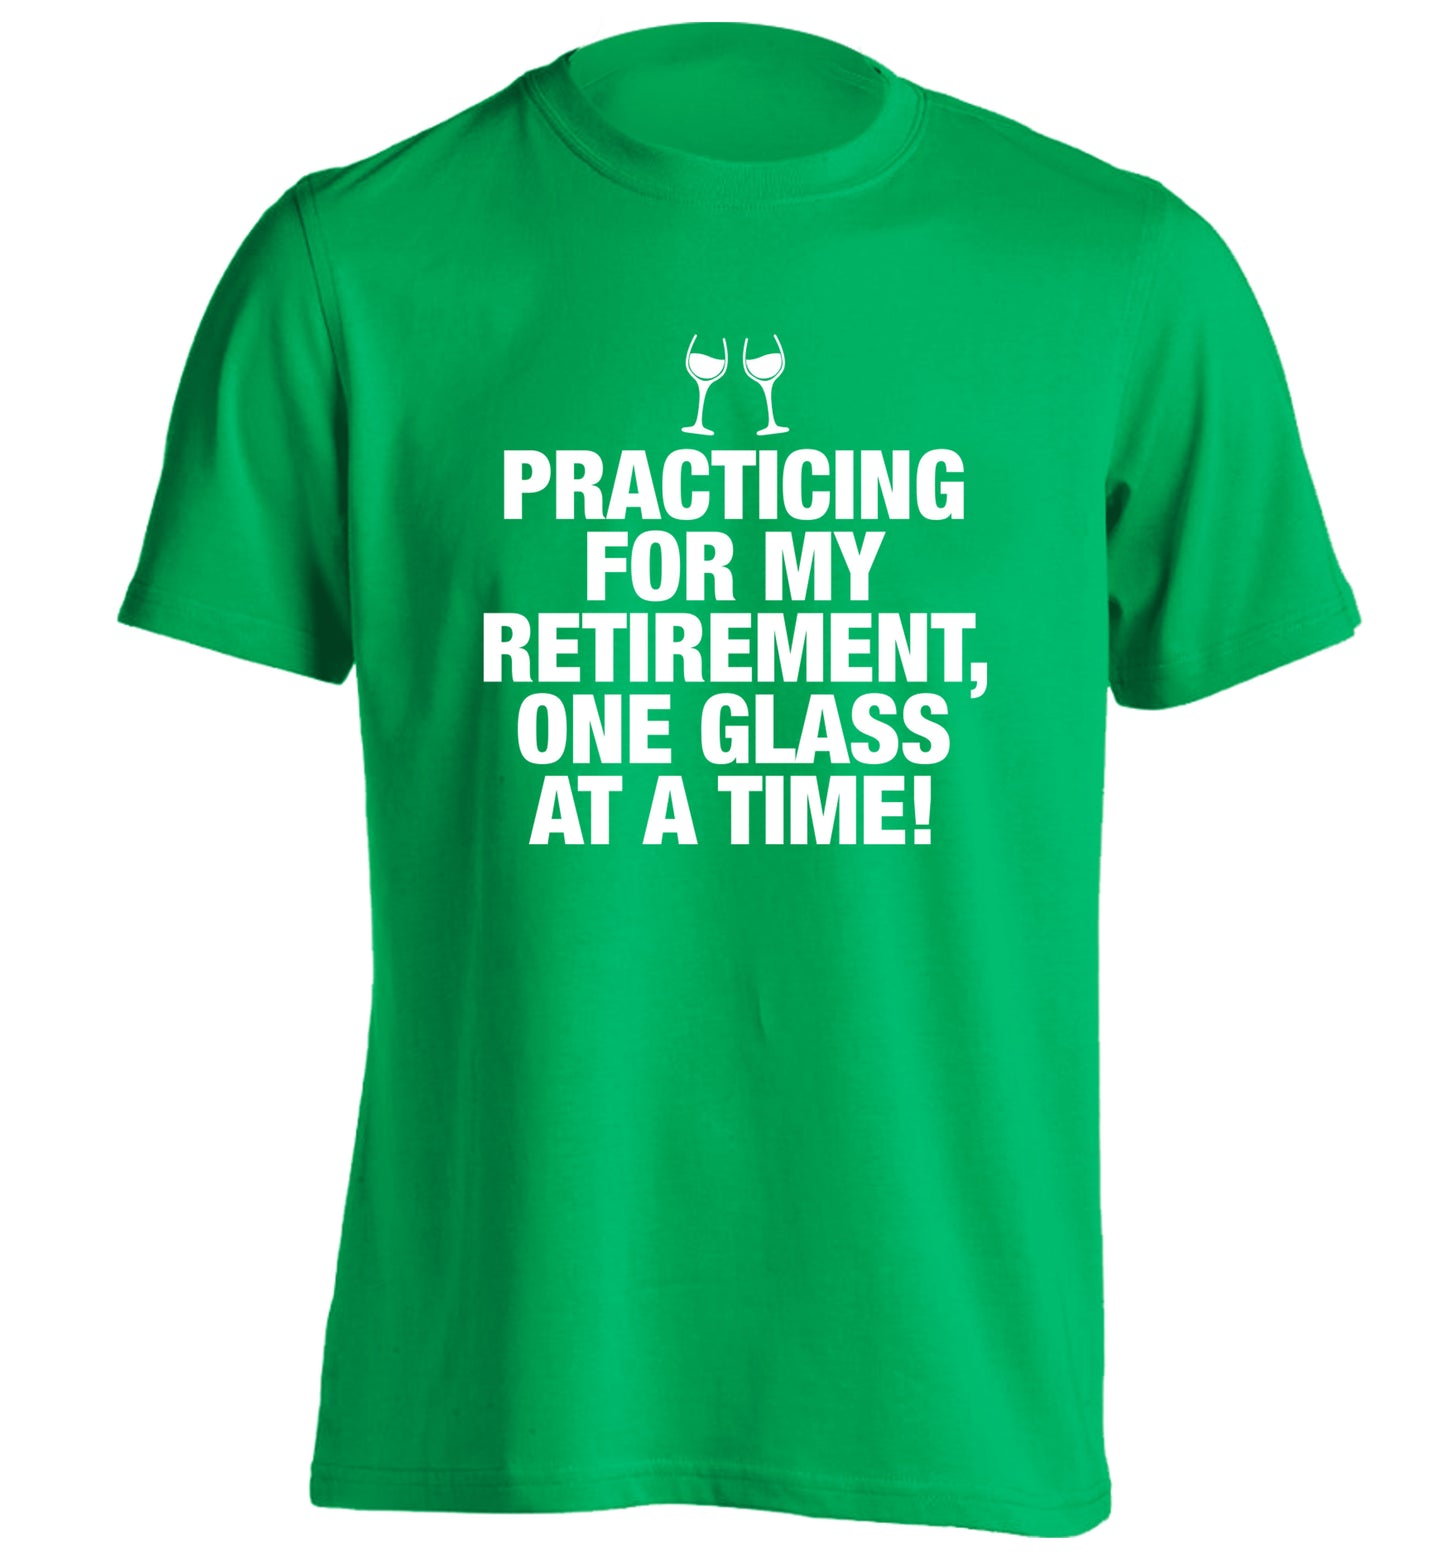 Practicing my retirement one glass at a time adults unisex green Tshirt 2XL